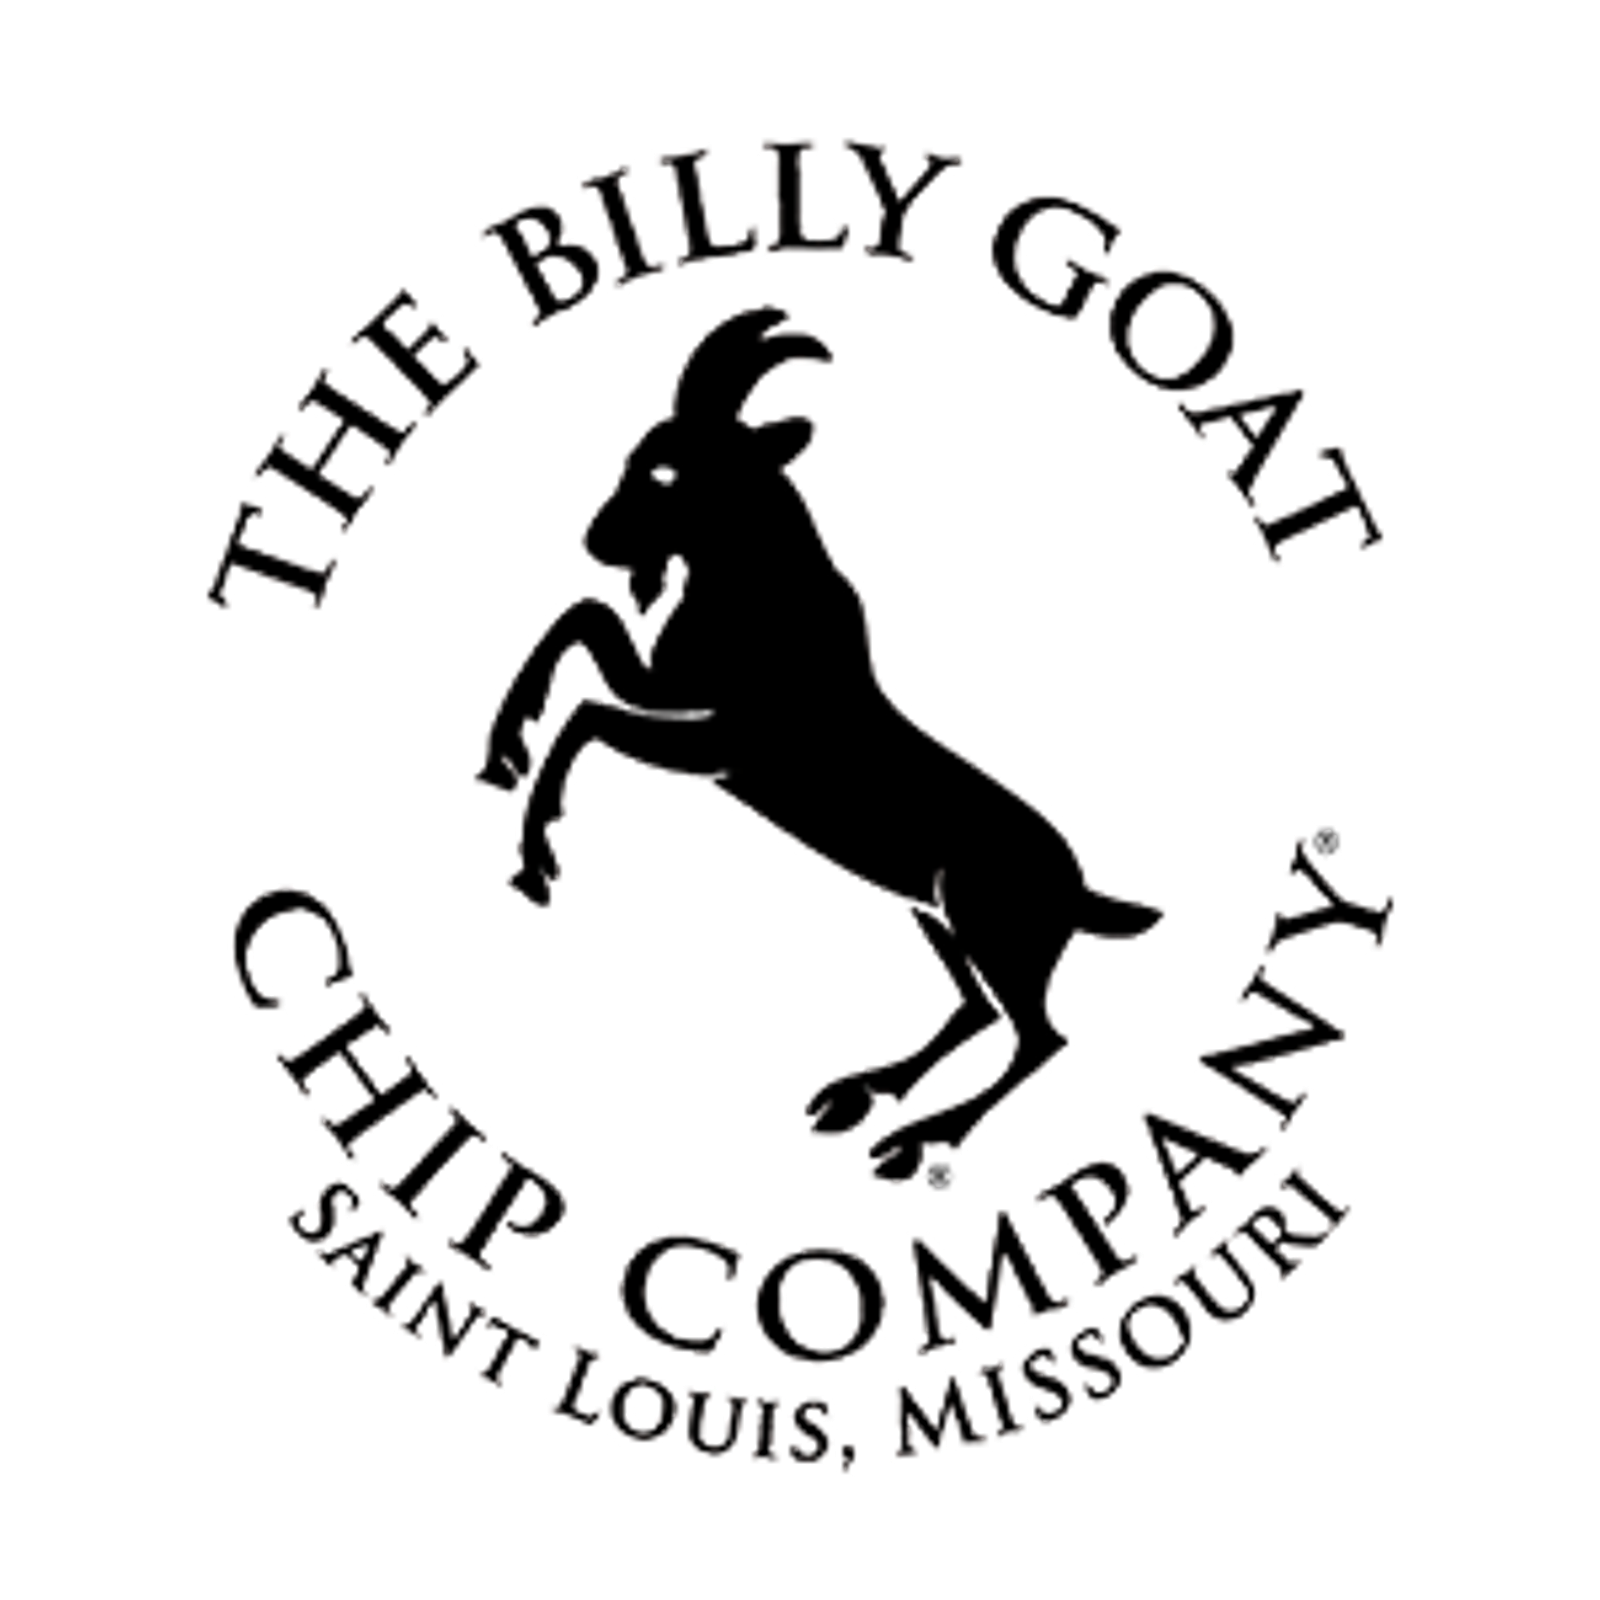 The Billy Goat Chip Company